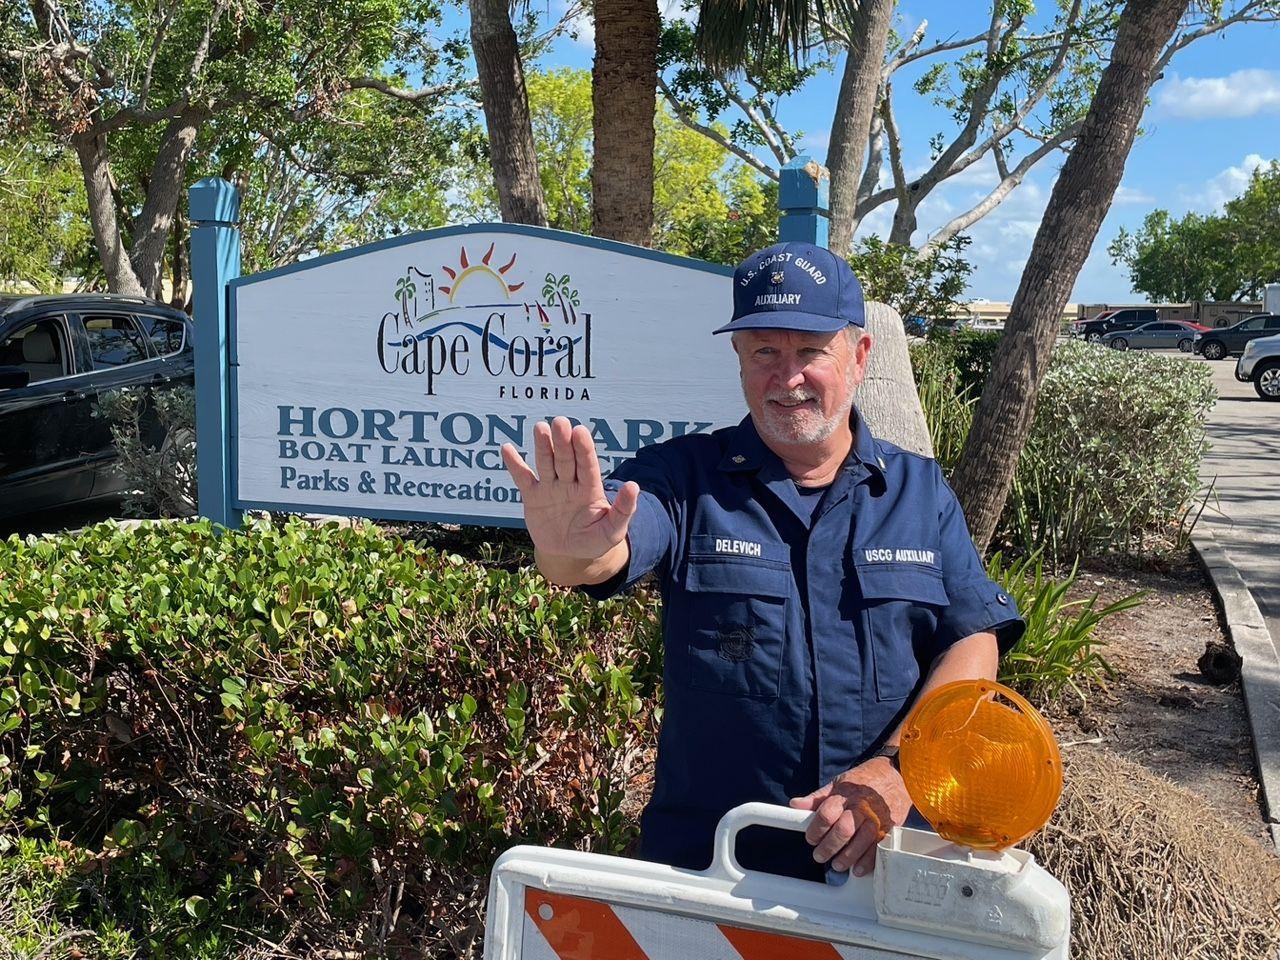 Auxiliarist Walter Delevich on gate duty at Horton Park, Station Ft. Myers Beach’s temporary home after Hurricane Ian reigned havoc upon its more permanent quarters on September 28, 2022